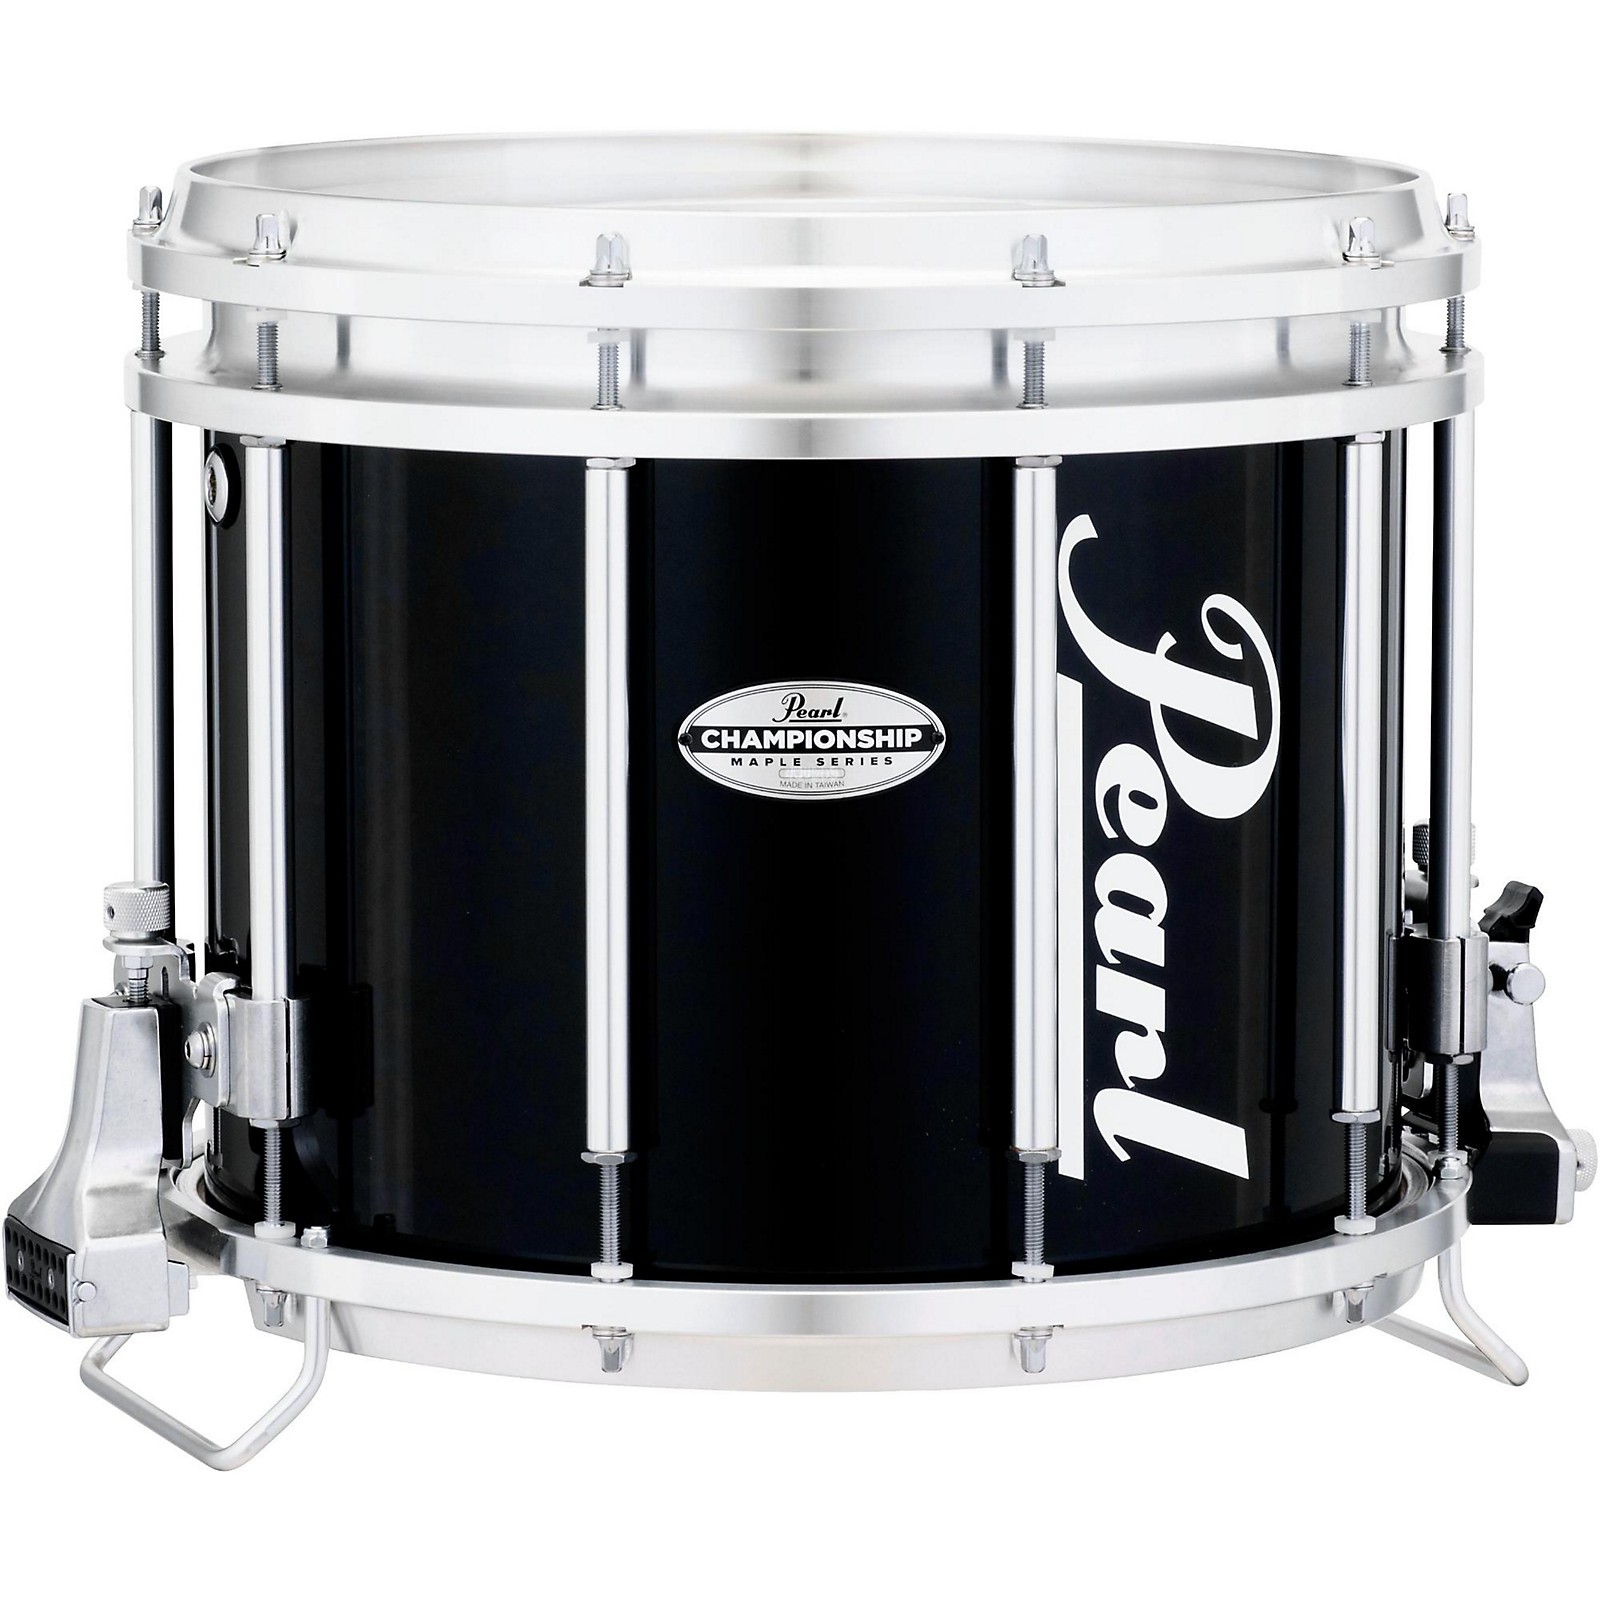 Timpani Drumhead Selection / Sizing Chart – Remo: Support